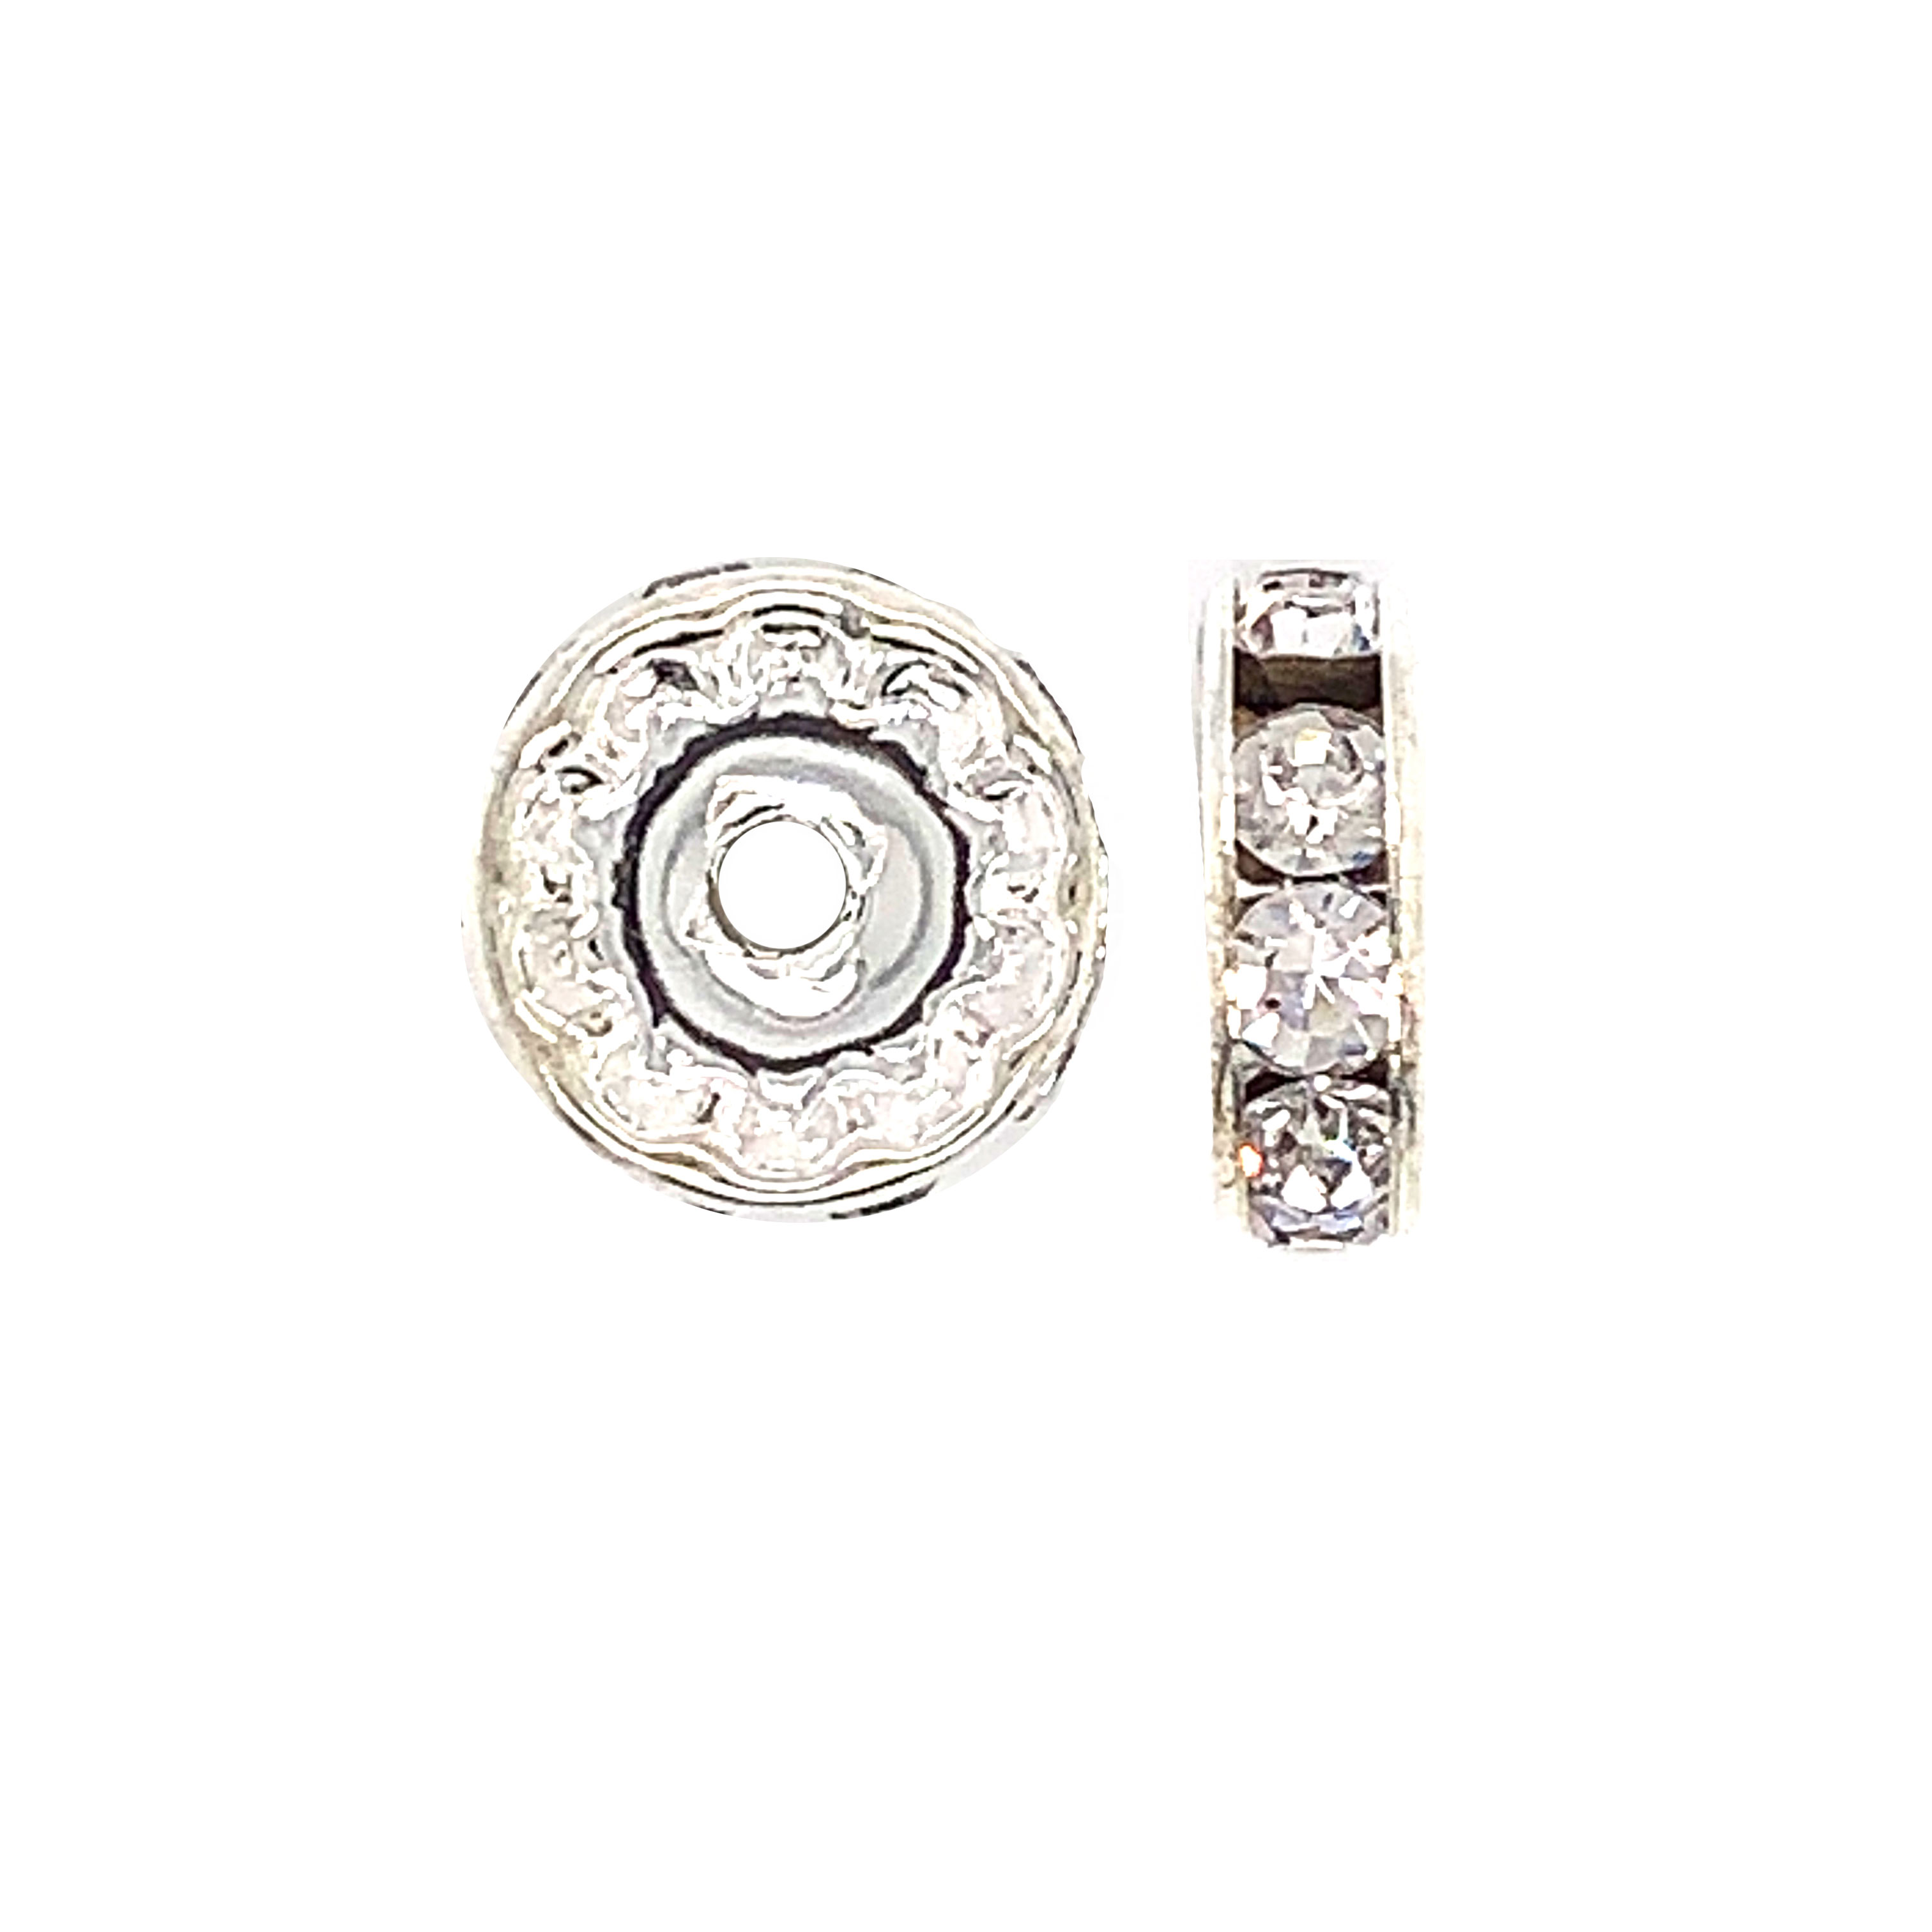 CZ 12mm Silver Tone Rondelle - Pack of 10